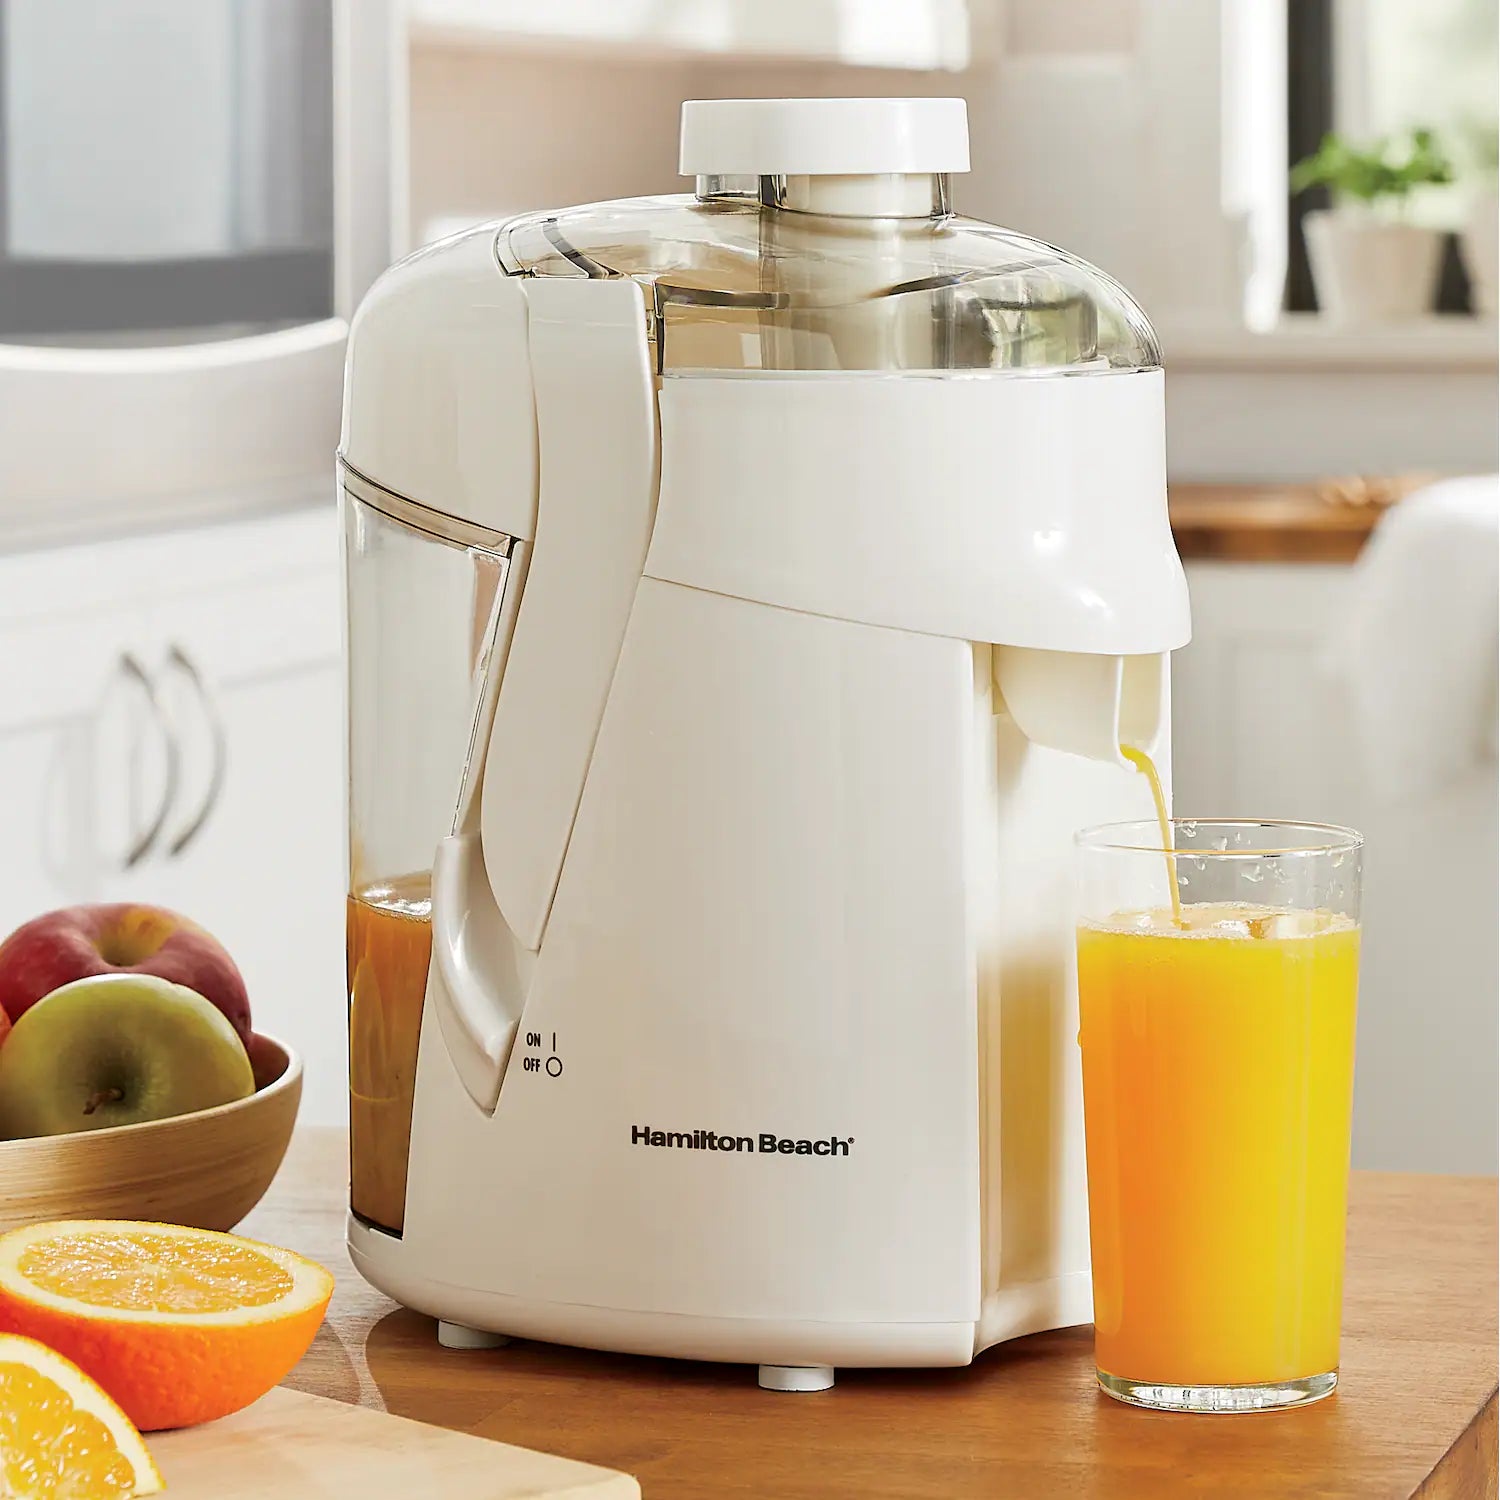 Hamilton Beach Juicer - household items - by owner - housewares